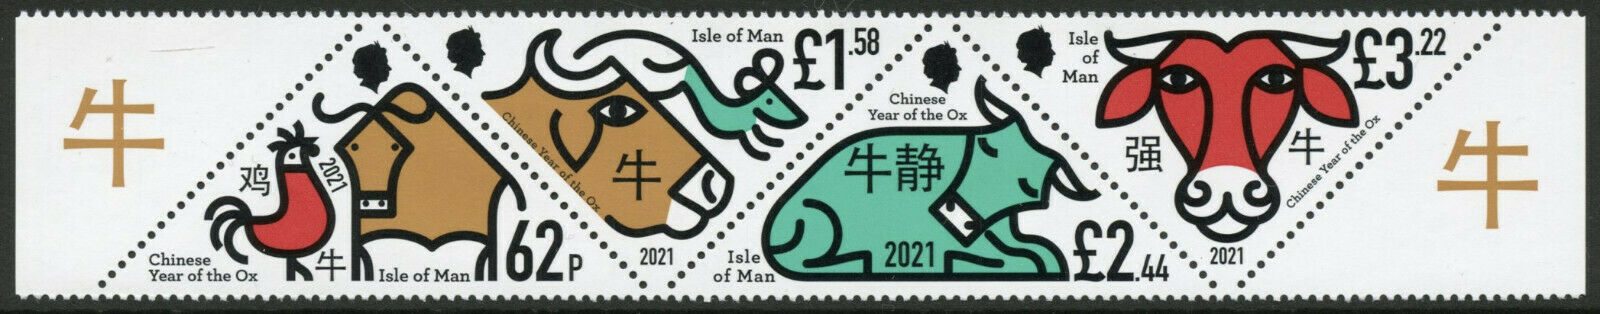 Isle of Man IOM Year of Ox Stamps 2021 MNH Chinese Lunar New Year 4v Strip